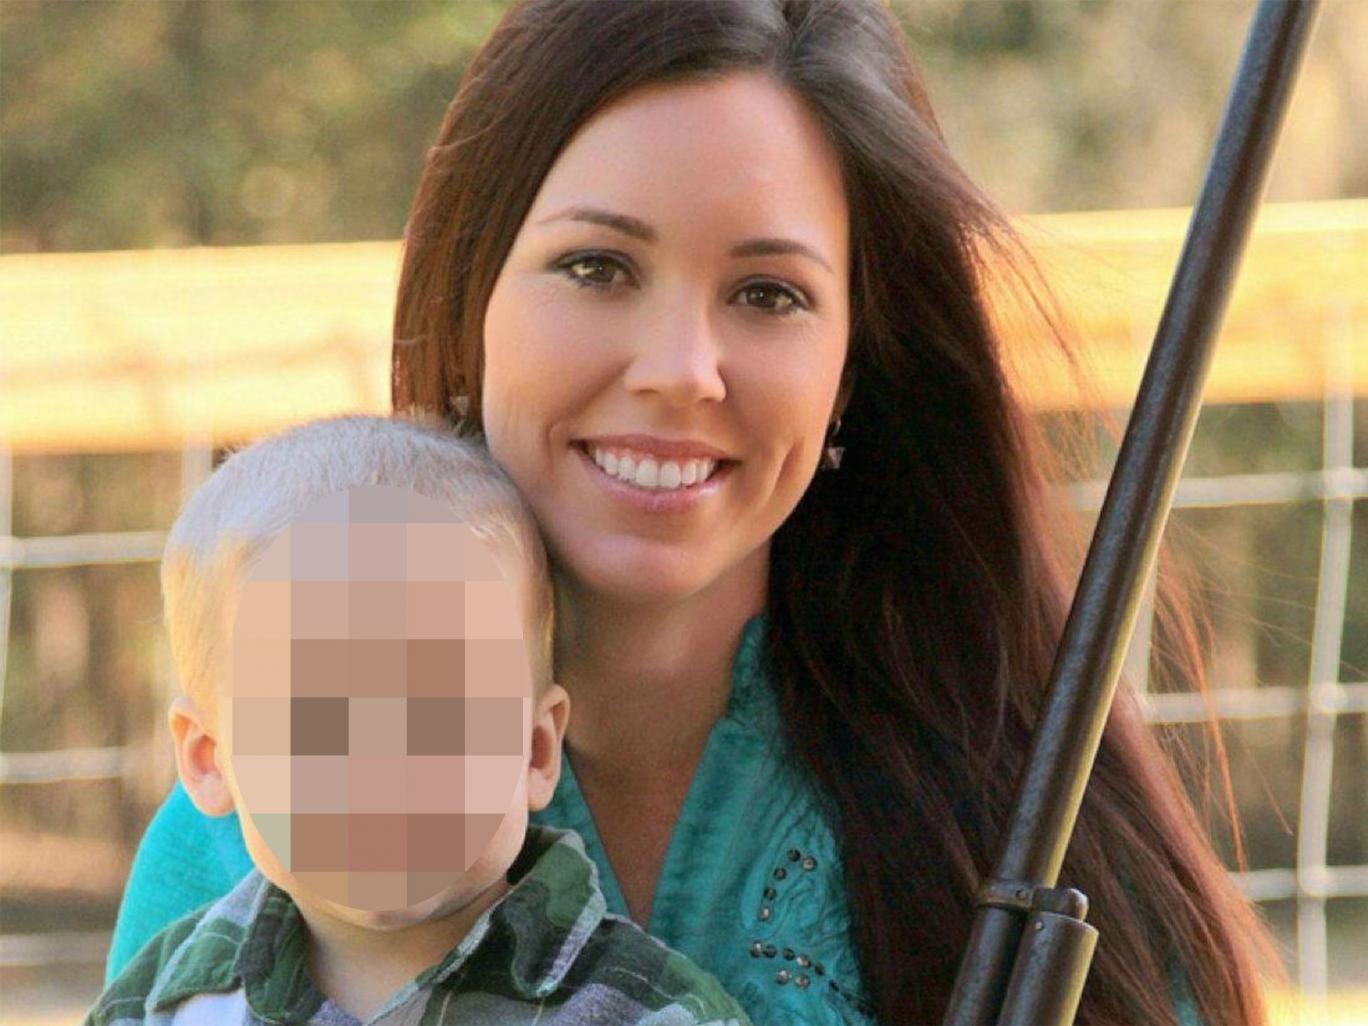 Jamie Gilt was seriously injured after her four-year-old son gained access to her gun